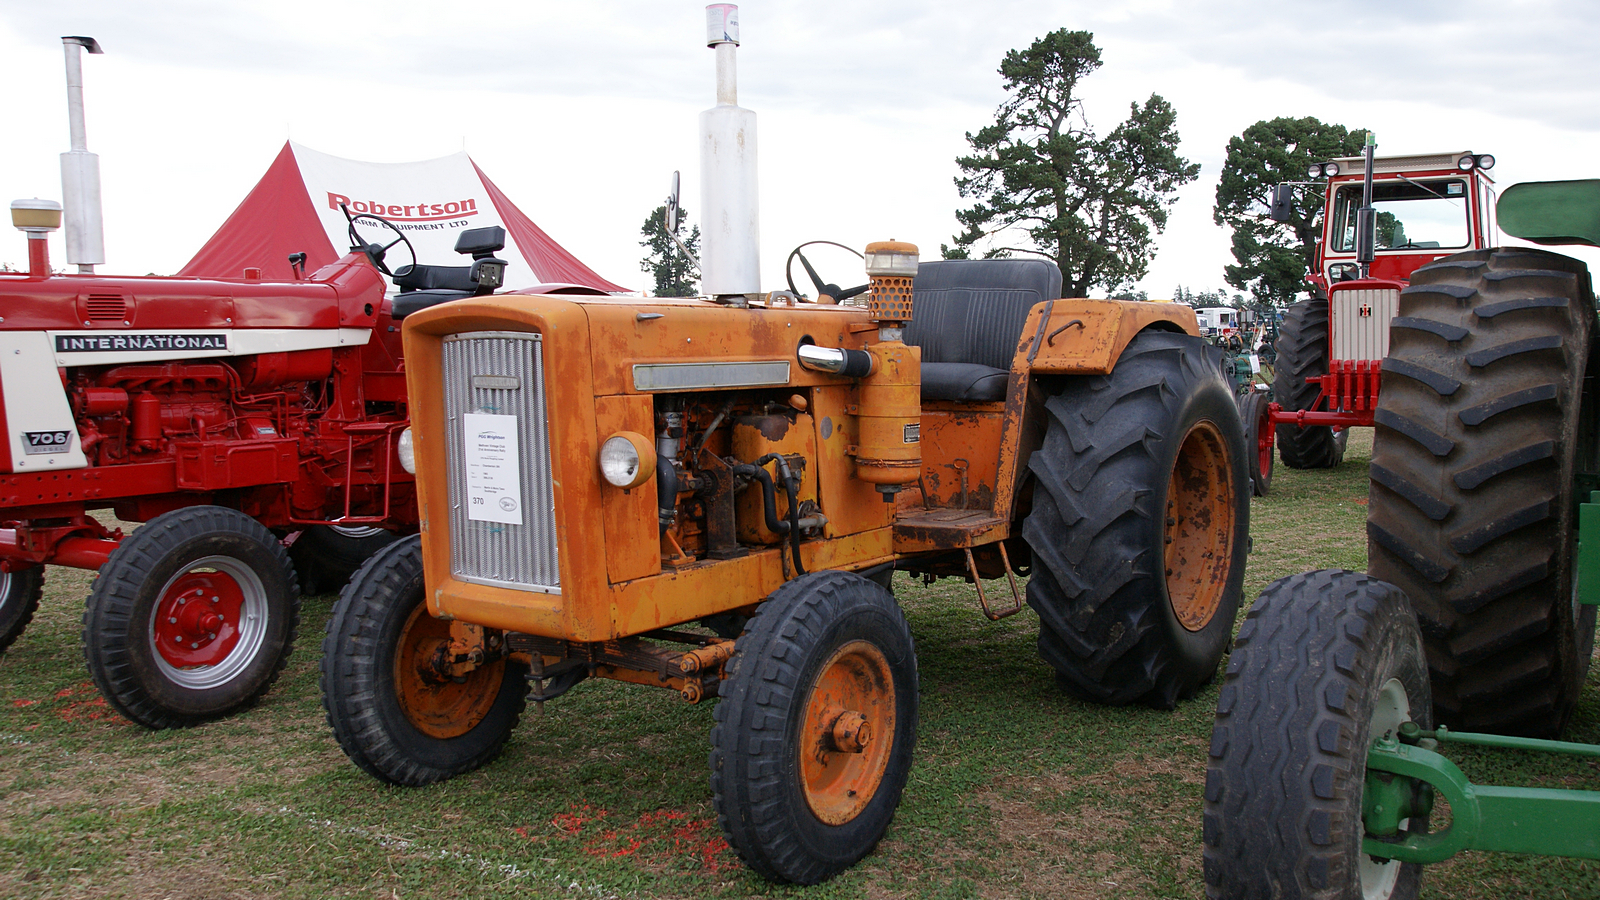 1965 Chamberlain 306 Tractor. | Seen at the Vintage Machiner ...